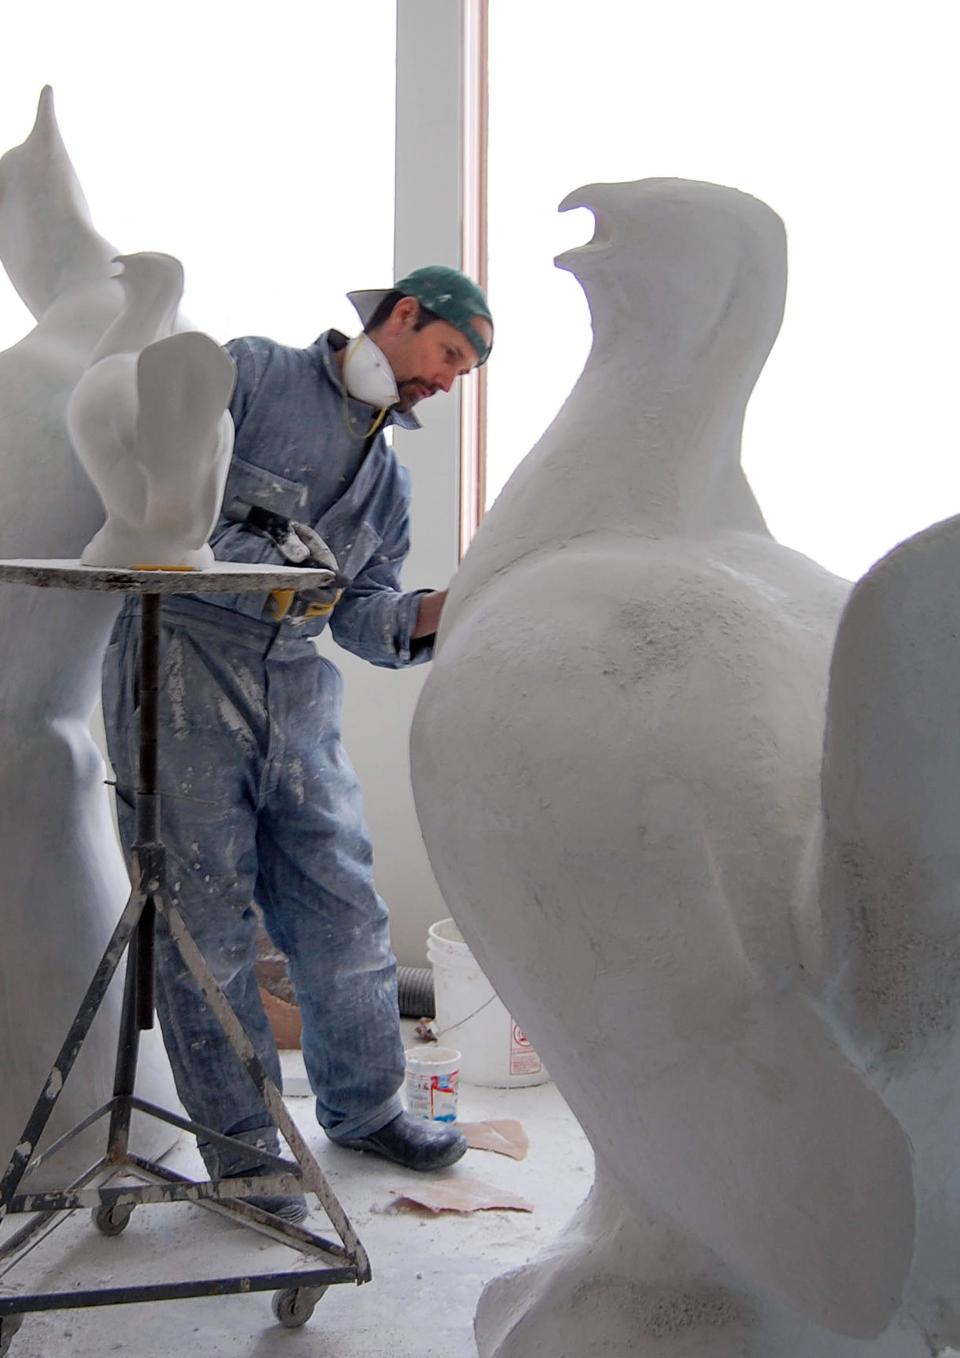 An artist in blue coveralls and a baseball cap surrounded by sculptures of birds. He is focused on one of them. They are all white and some are bigger than him. The room is all white and large windows show nothing but white light.